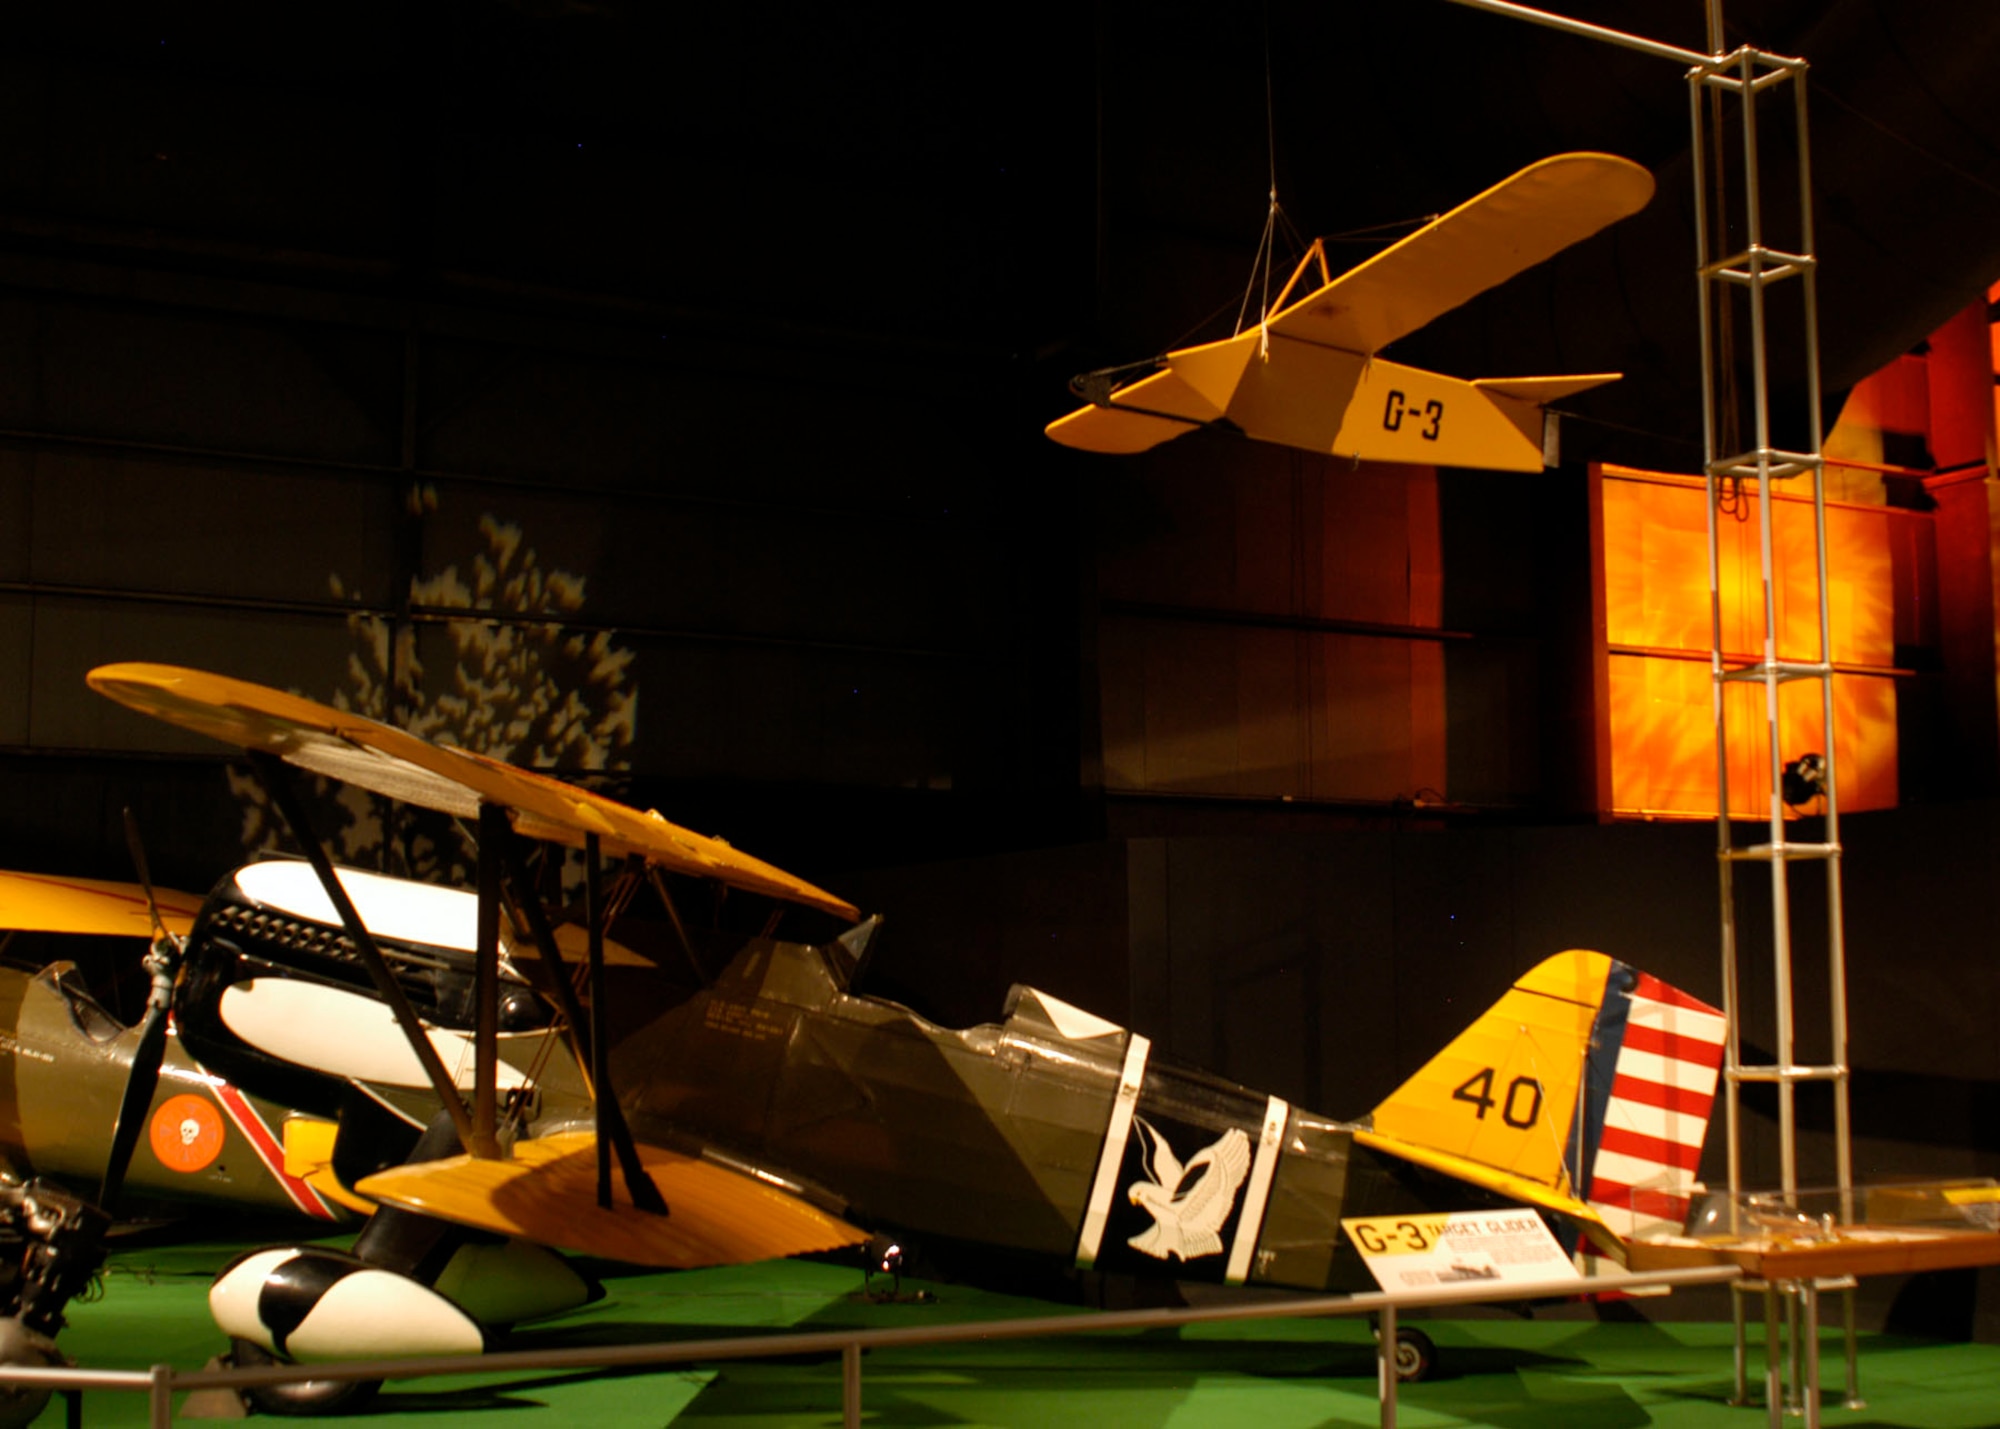 DAYTON, Ohio -- G-3 target glider (top right) in the Early Years Gallery at the National Museum of the United States Air Force. (U.S. Air Force photo)